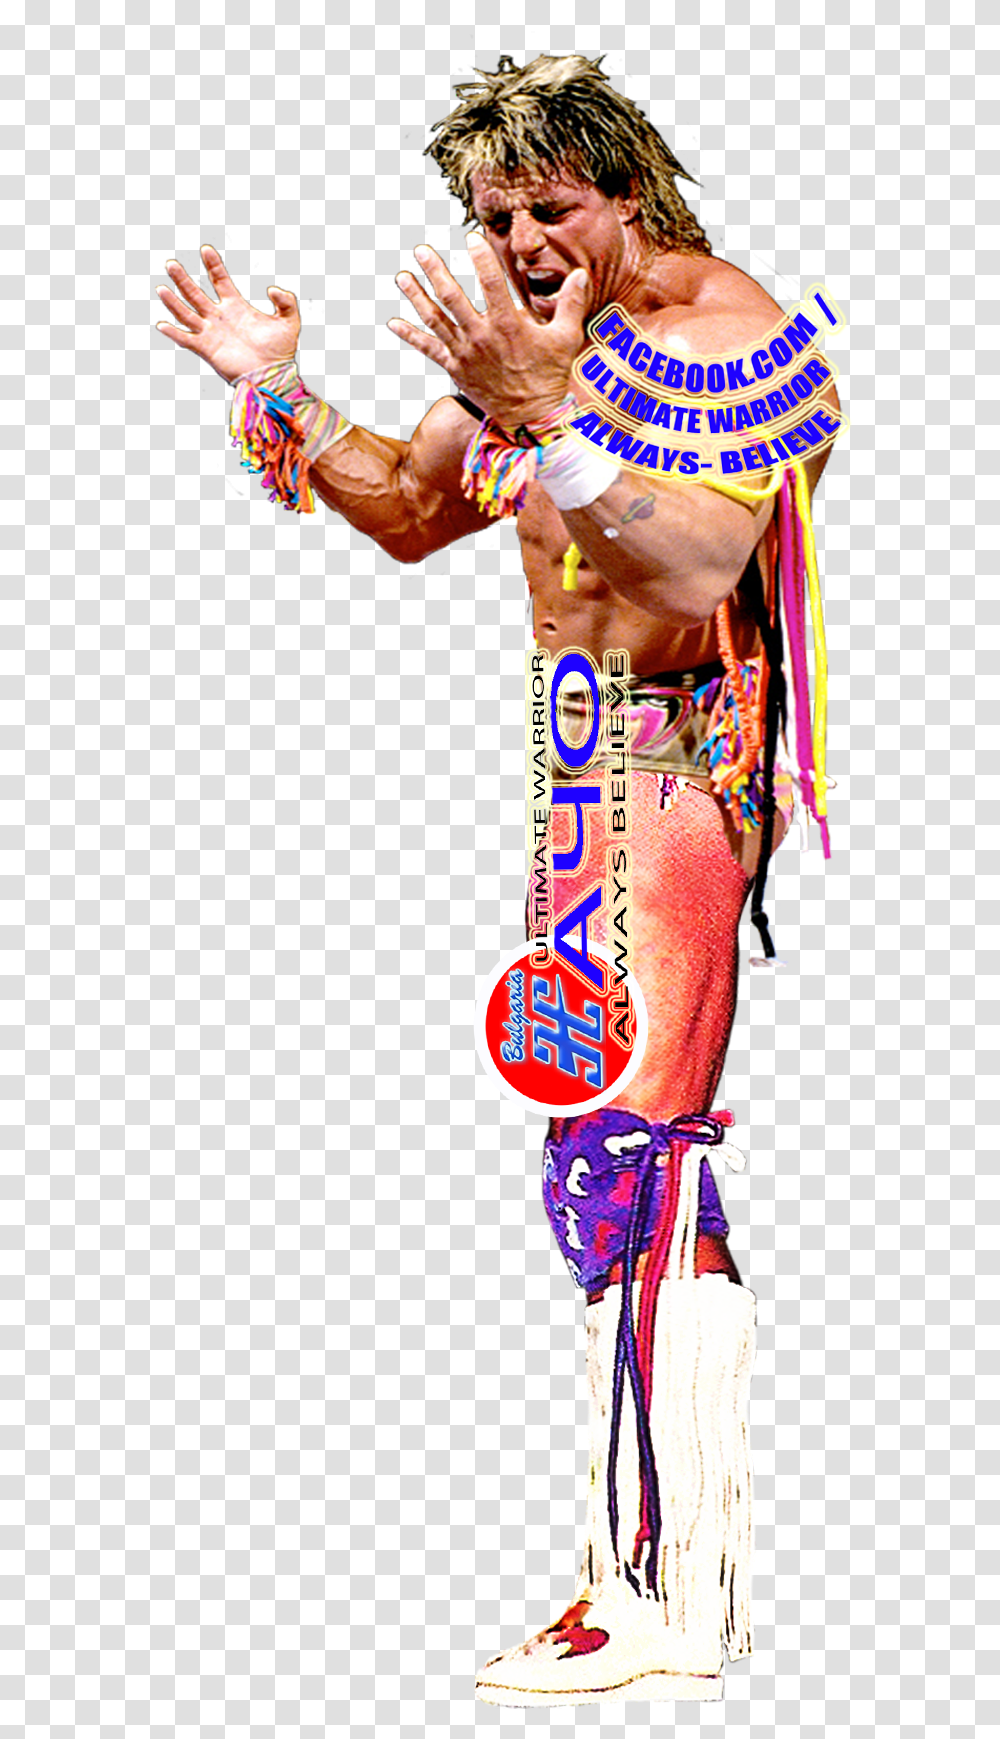 Naidenwarrior Na4o76 On Twitter Ultimate Warrior You Are Dance, Person, Costume, Adventure, Leisure Activities Transparent Png